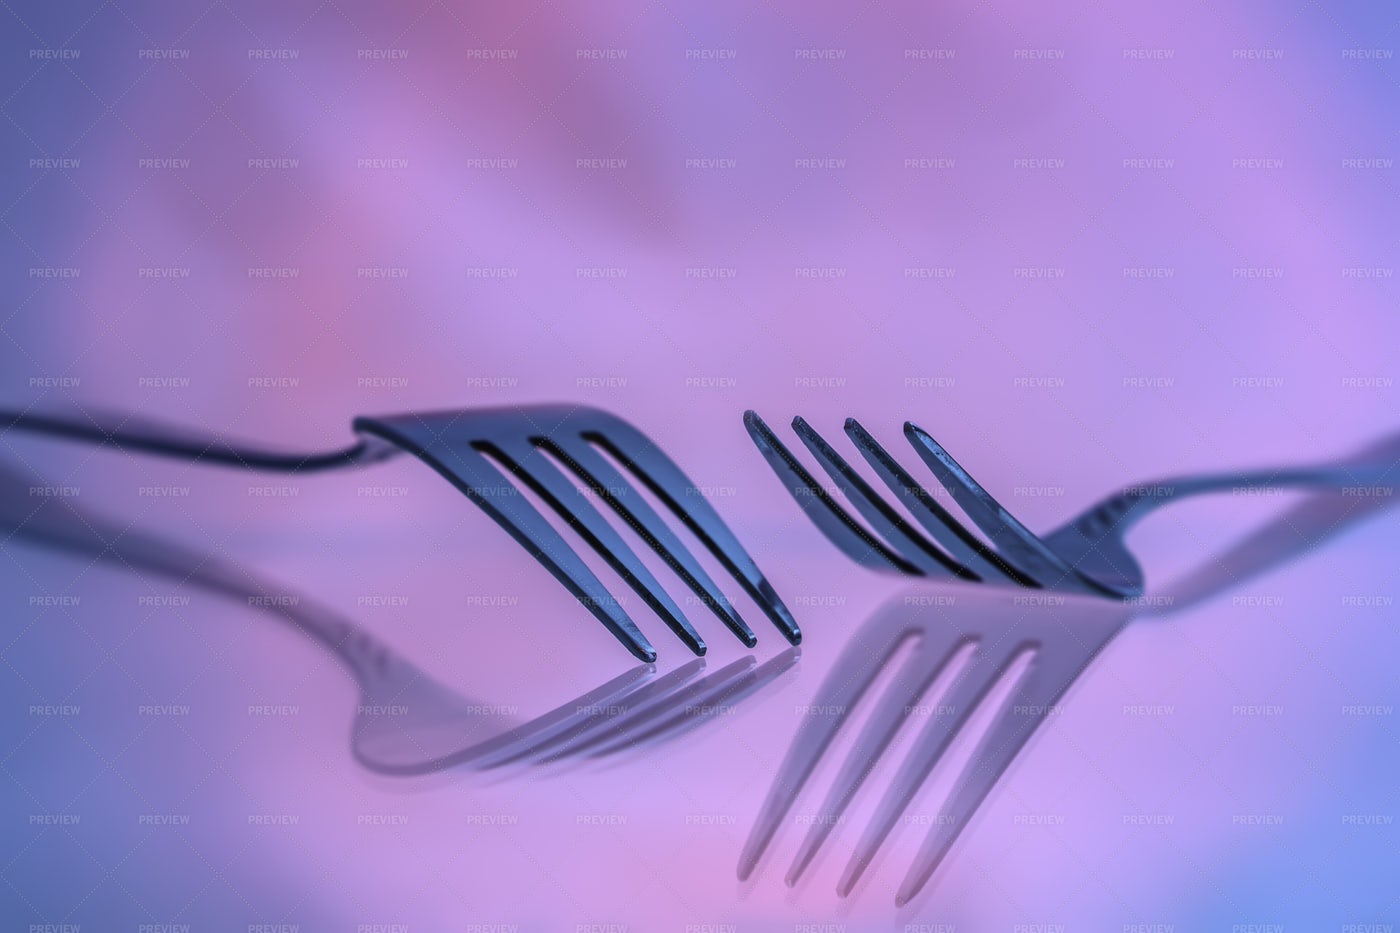 Two Forks And Reflection: Stock Photos